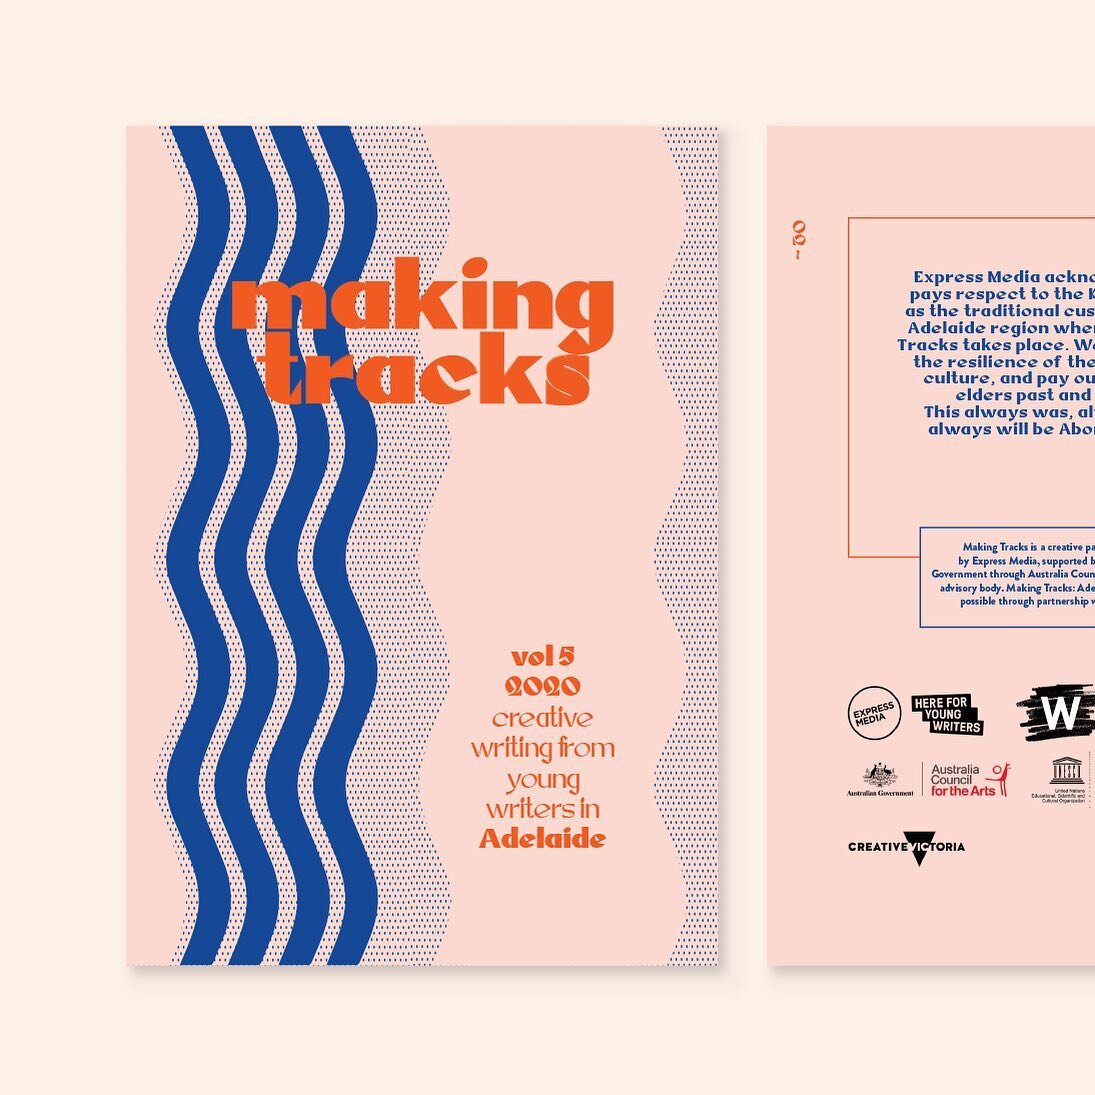 2020 &bull; Making Tracks Zine for Express Media &bull; Vol 5 Adelaide &bull; A travelling pop-up workshop series and zine publication aimed at developing the work of young writers in Australia ~